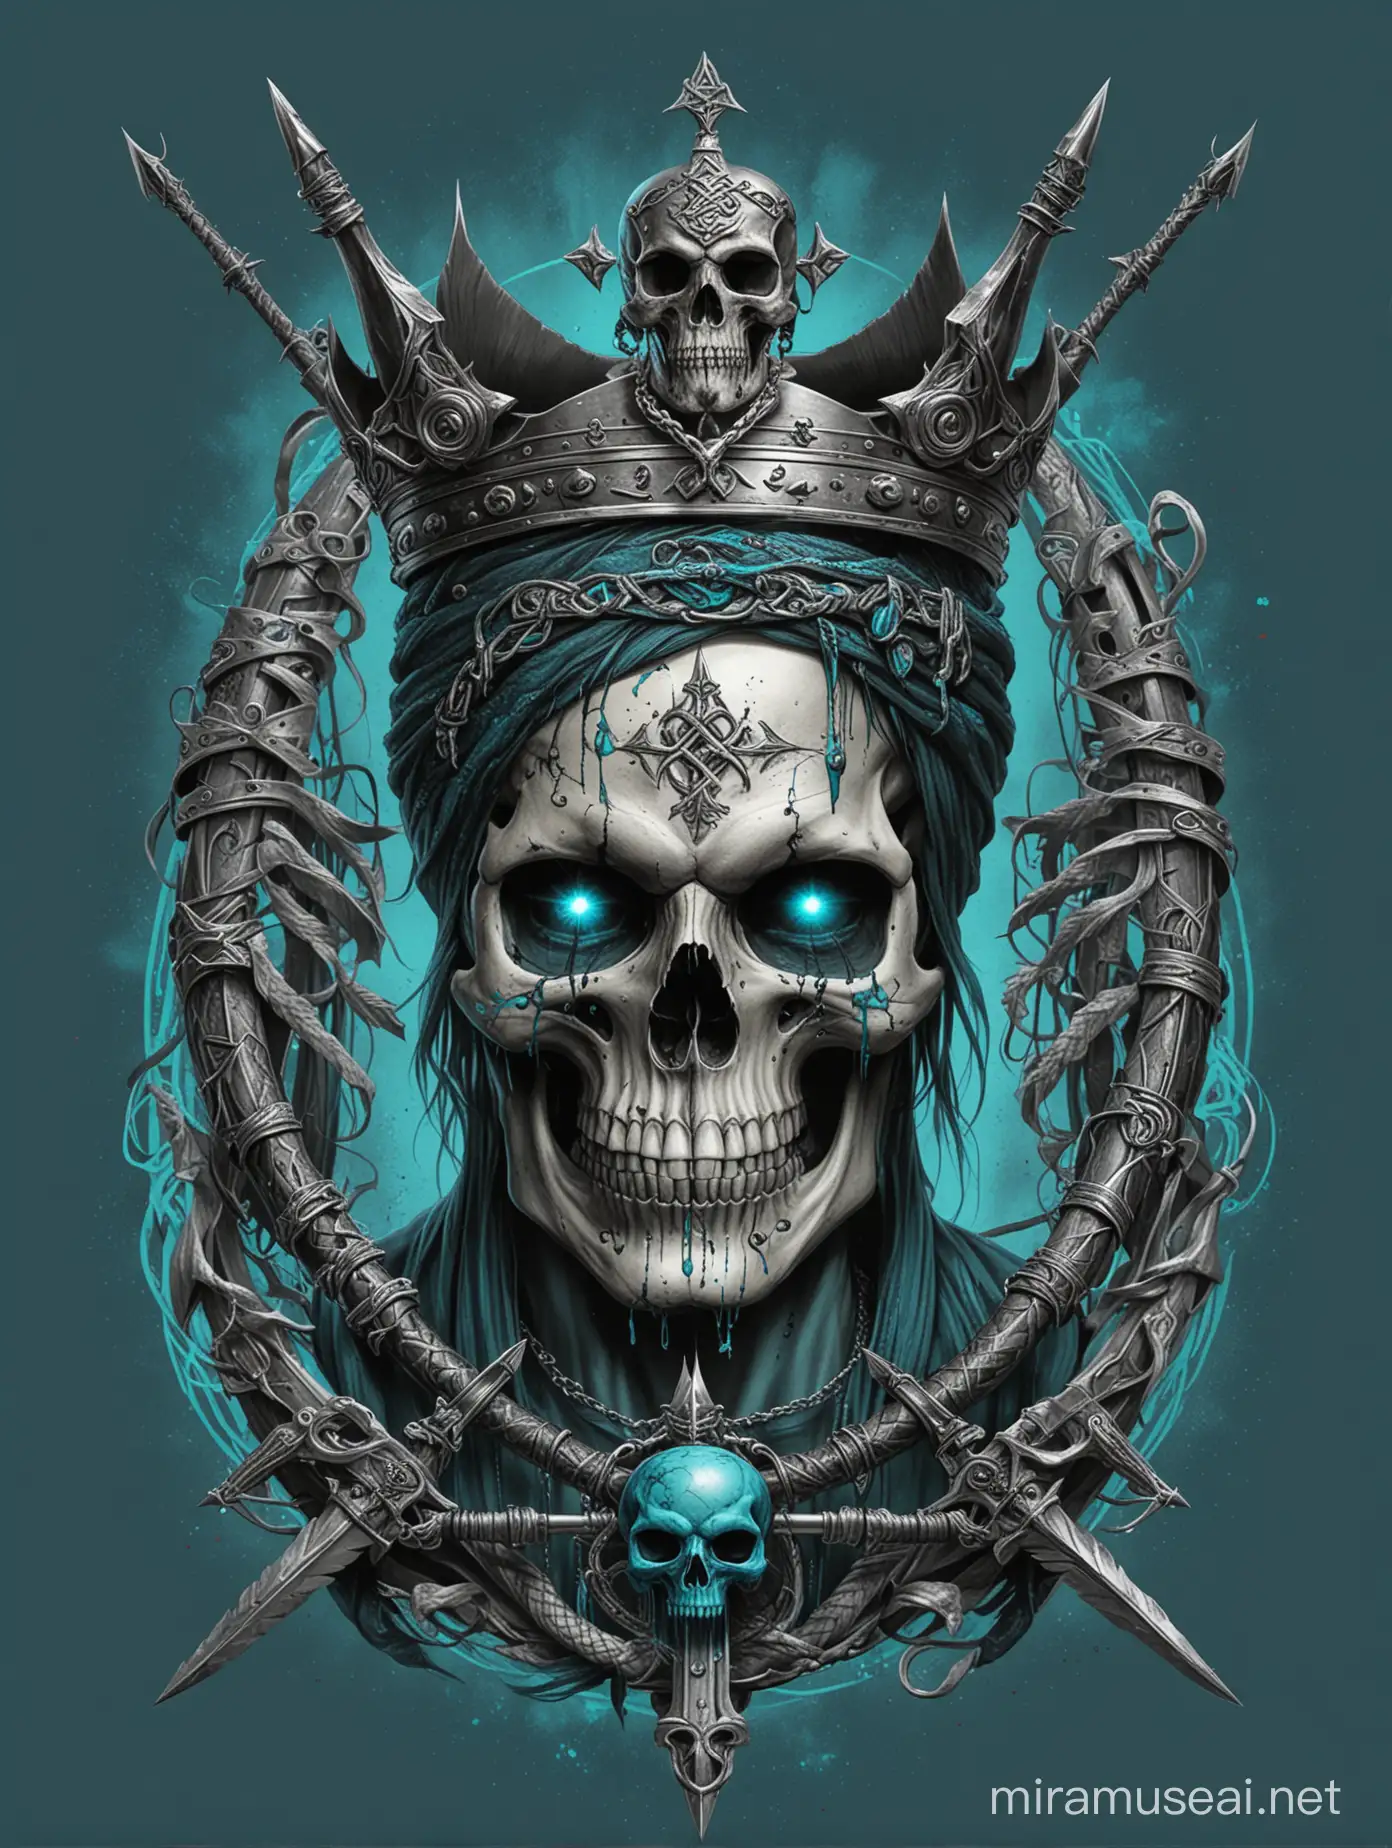 man skull with celtic symbols and crown, bloodshot eyes, turquoise black rose, blue black cobra snake, pulley bow and arrows, compound, blood, blue fire, no background, t-shirt design